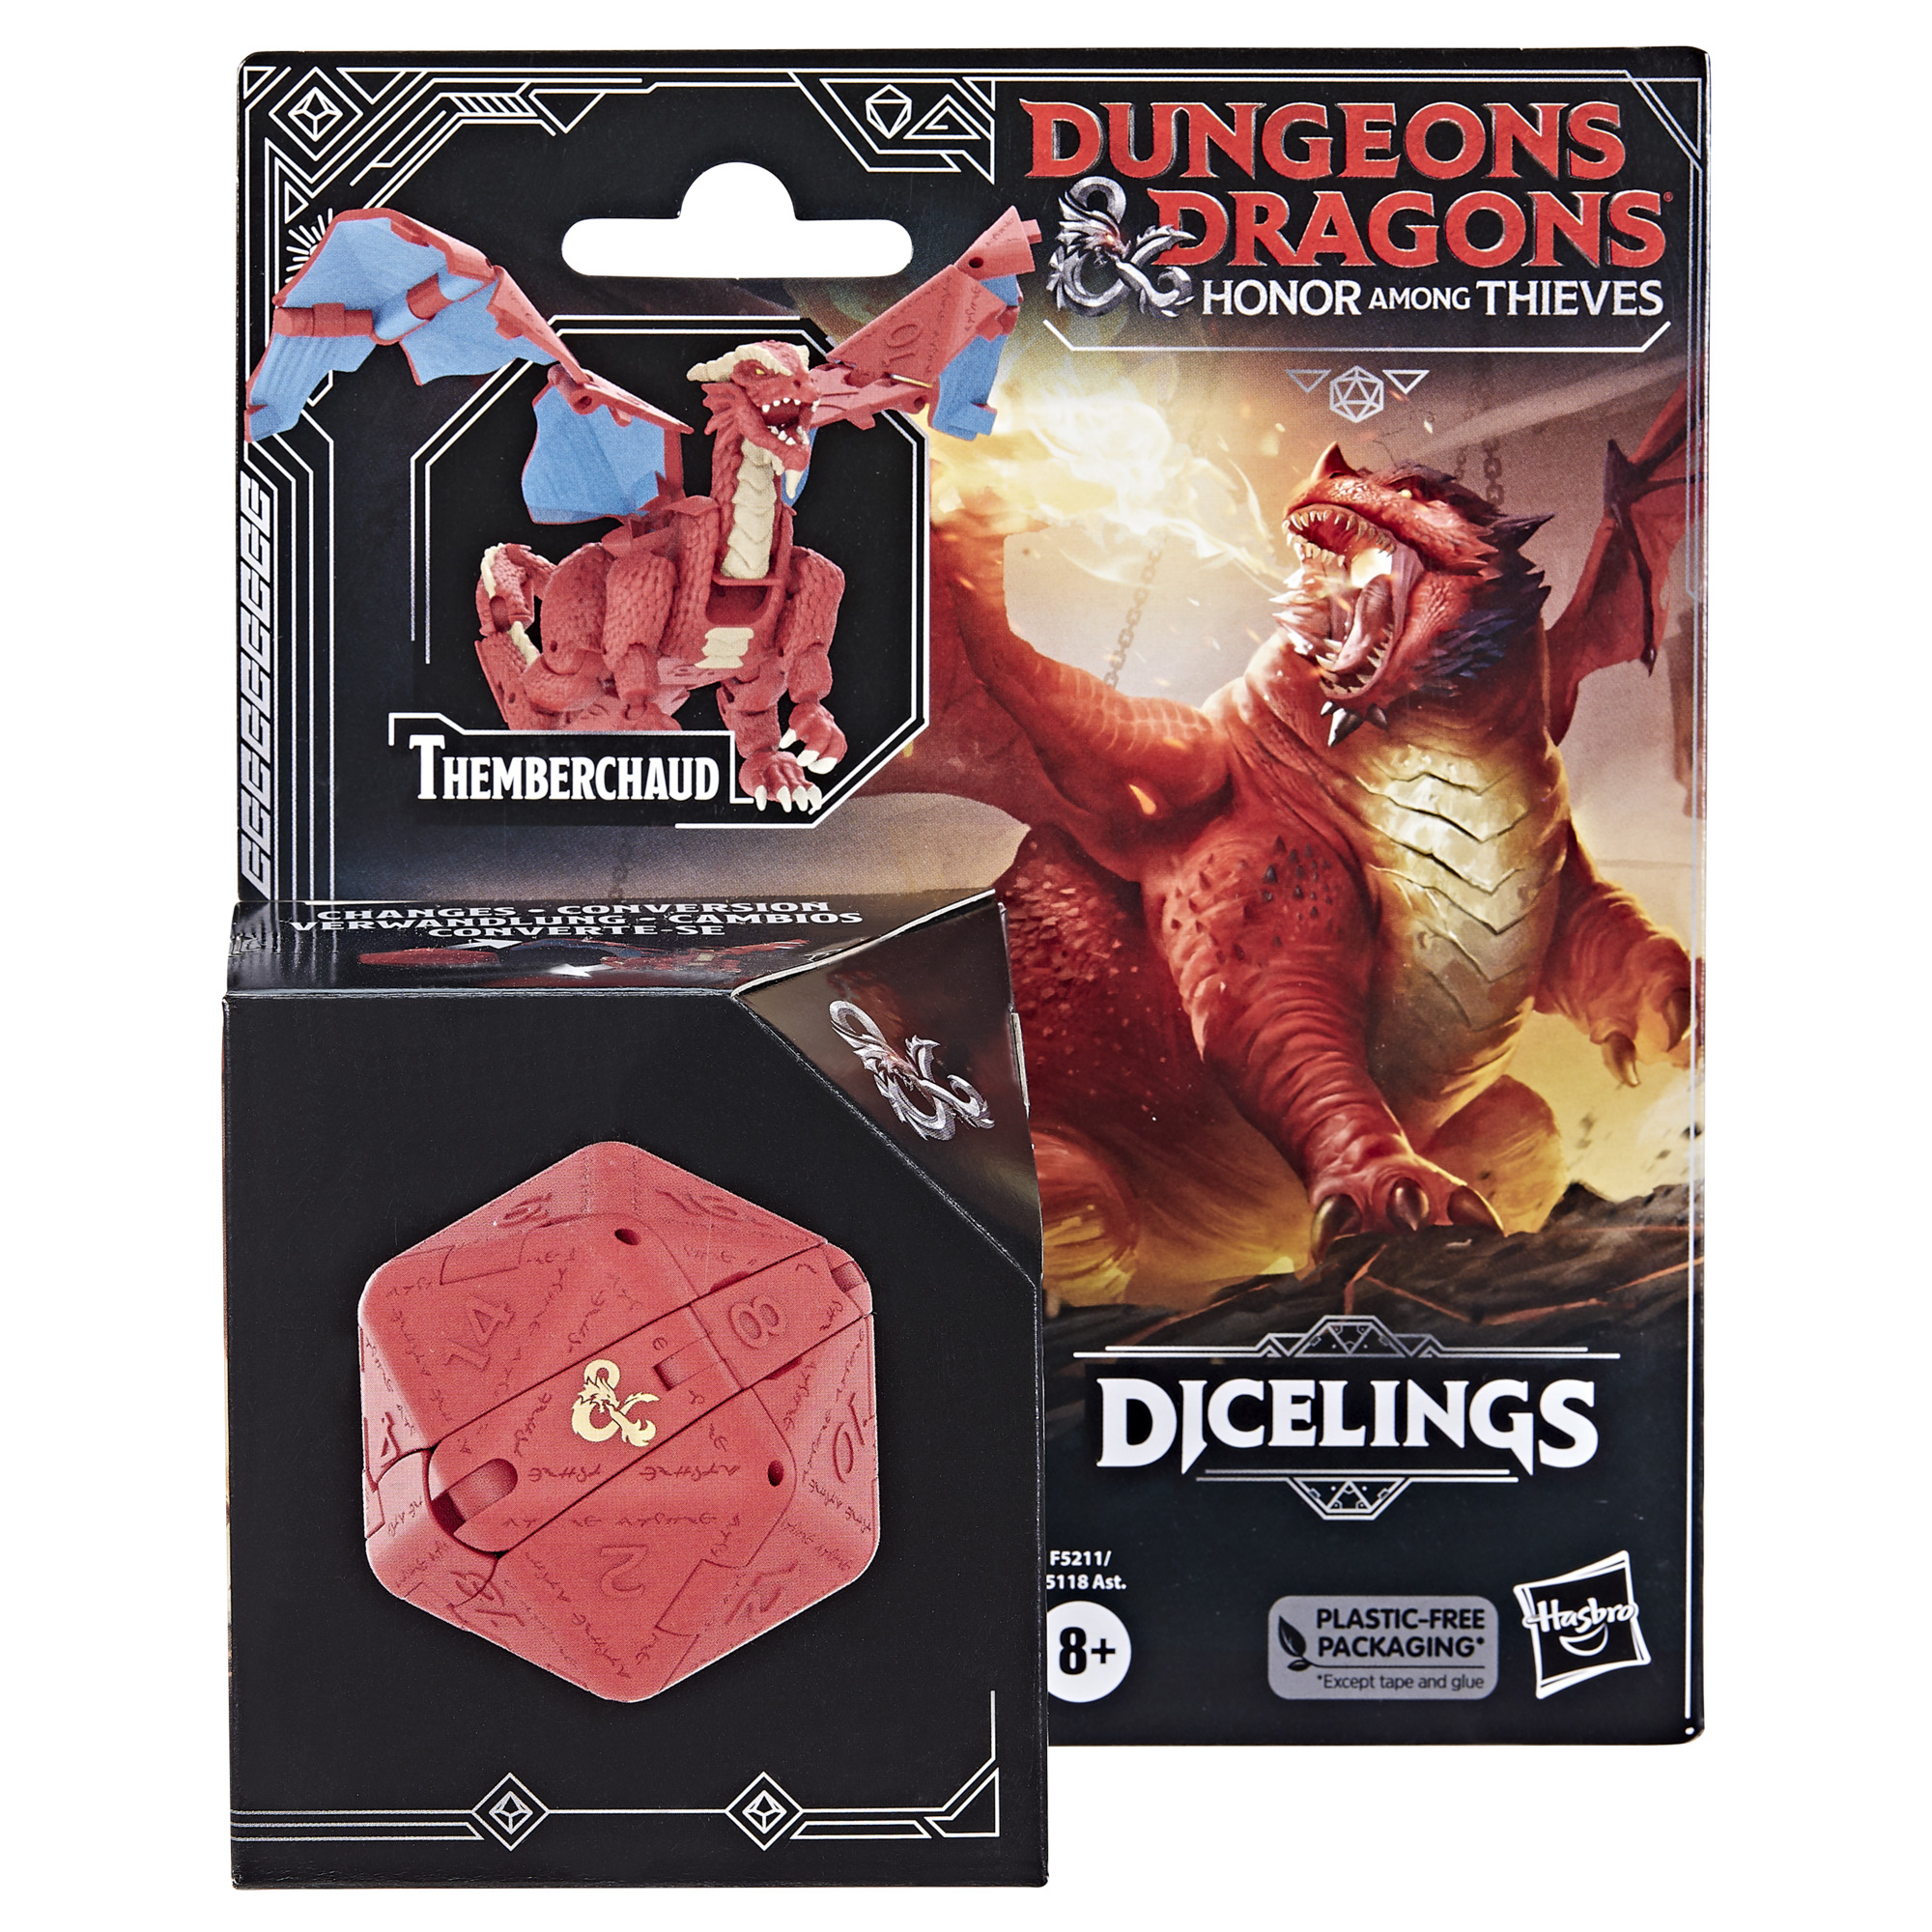 Dungeons & Dragons HONOR AMONG THIEVES Dicelings Red Dragon 